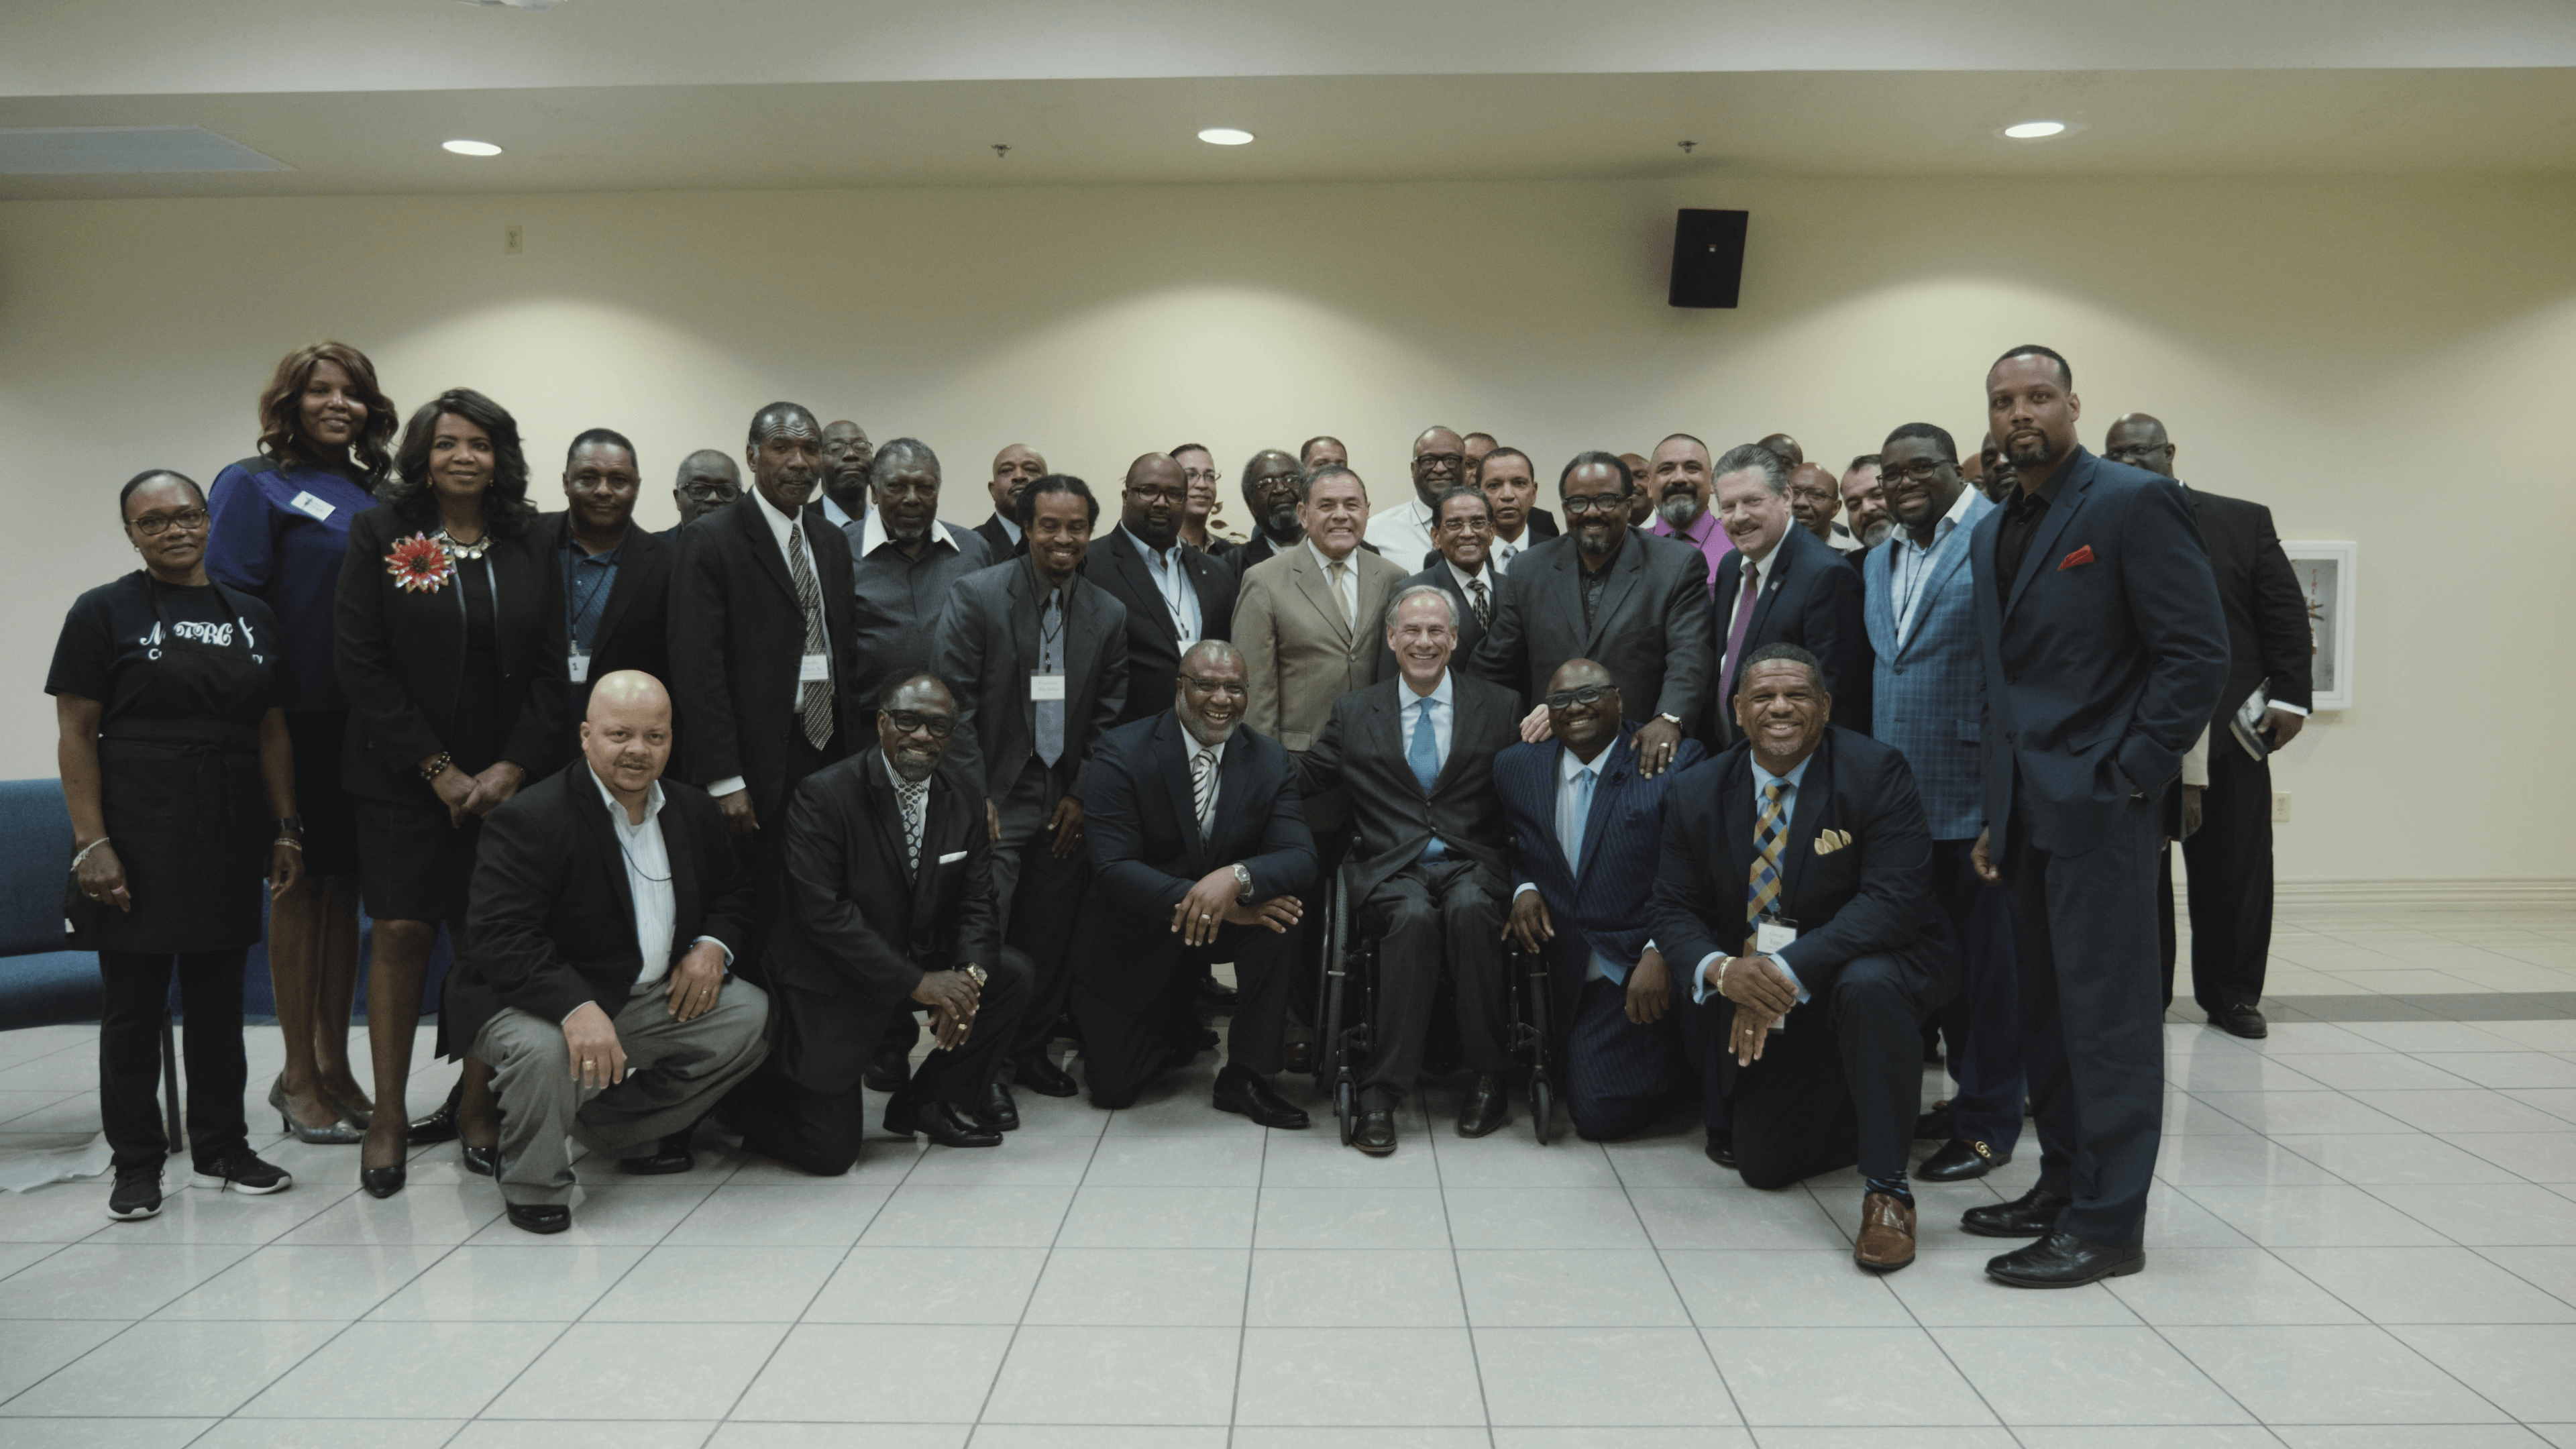 Governor Greg Abbott Attends Texas Pastors Roundtable Discussion